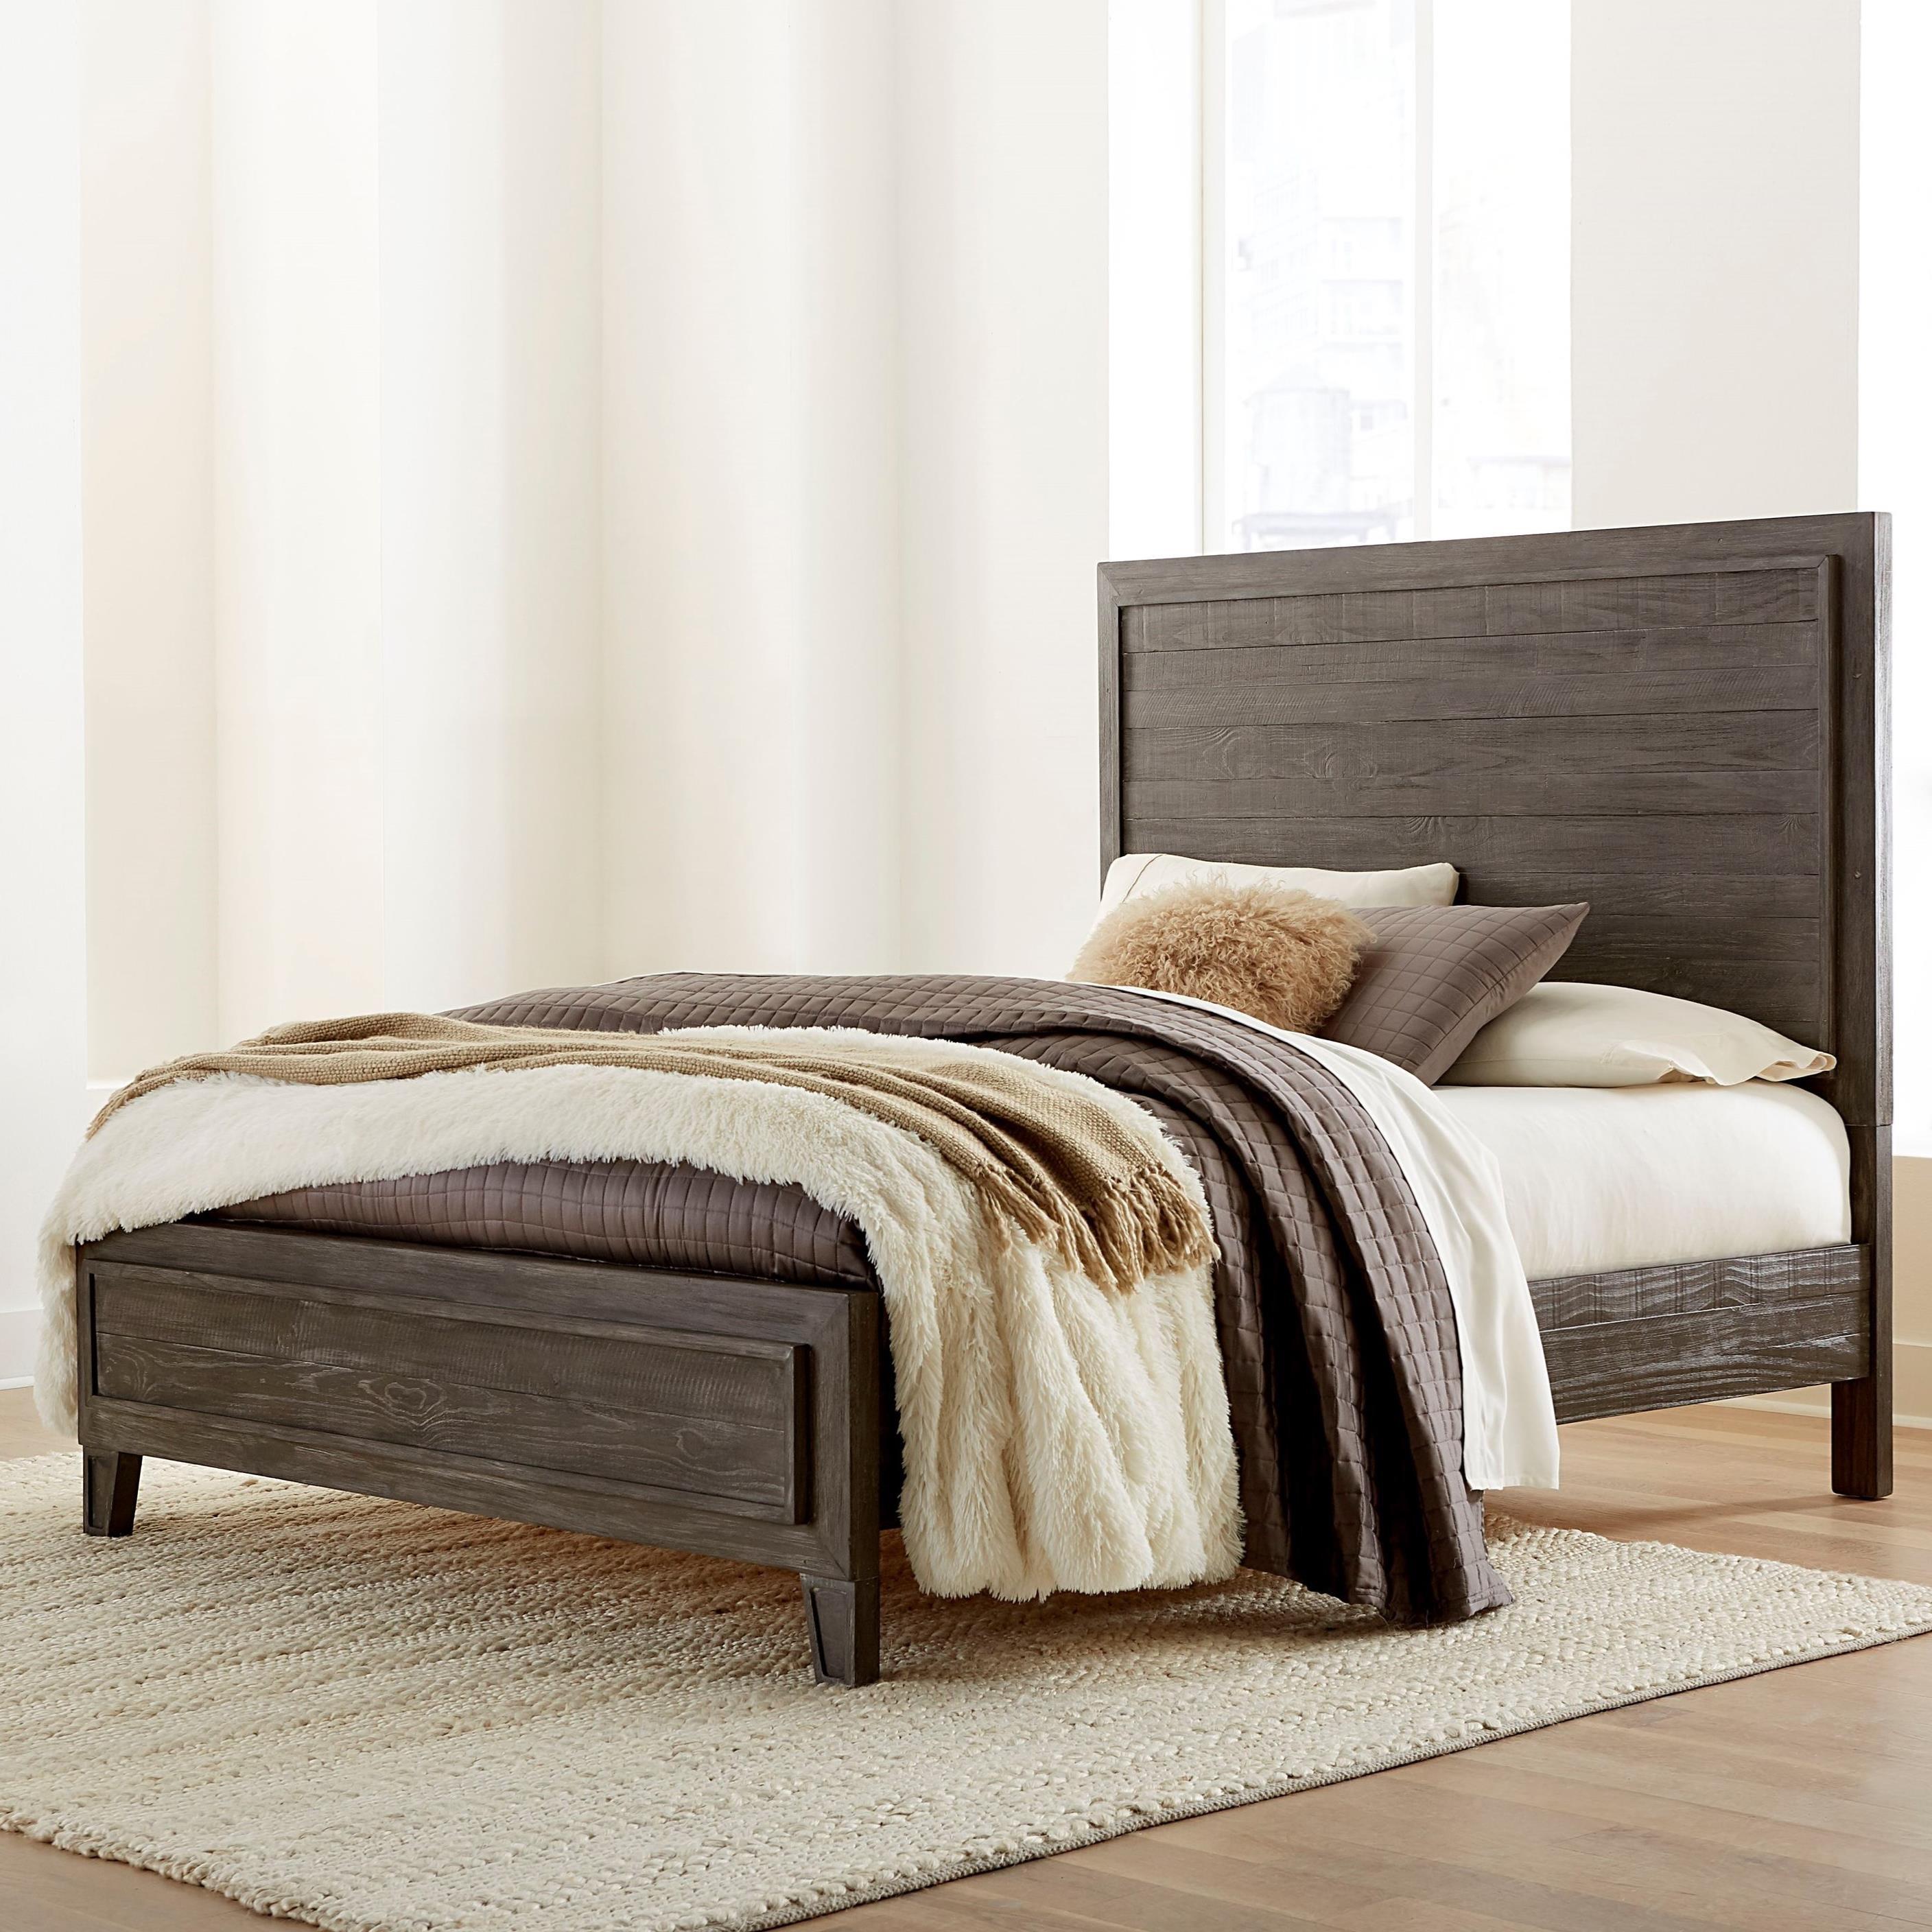 Casual, Rustic Panel Bed HADLEY A4H6A5 in Onyx 